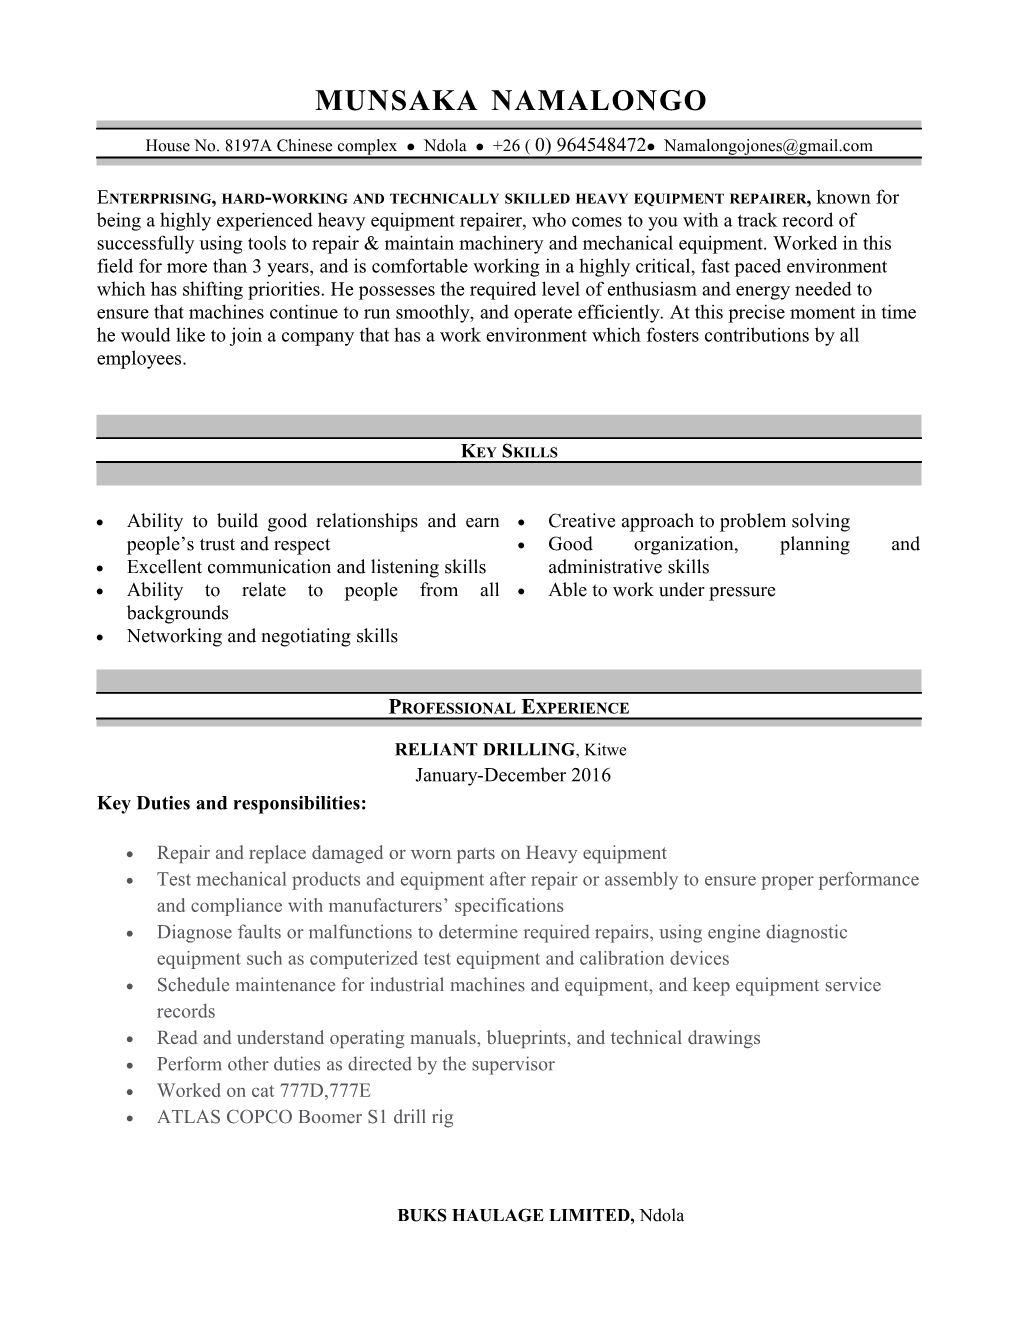 Sample Resume for an Accounts Payable Specialist